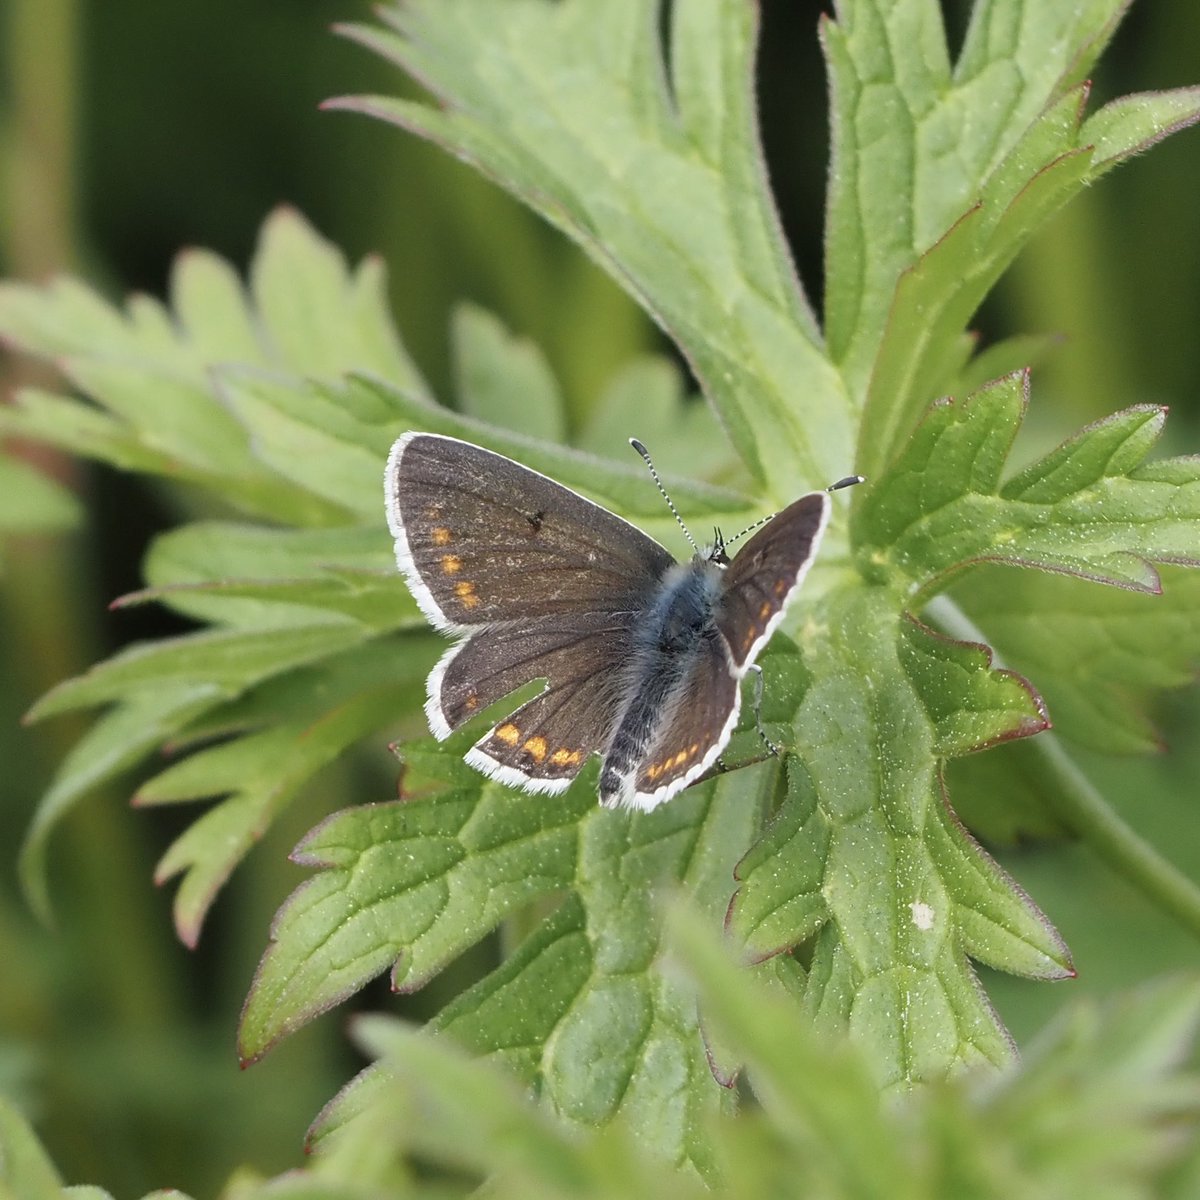 There were quite a few Brown Argus flying today #ThamesBarrierPark